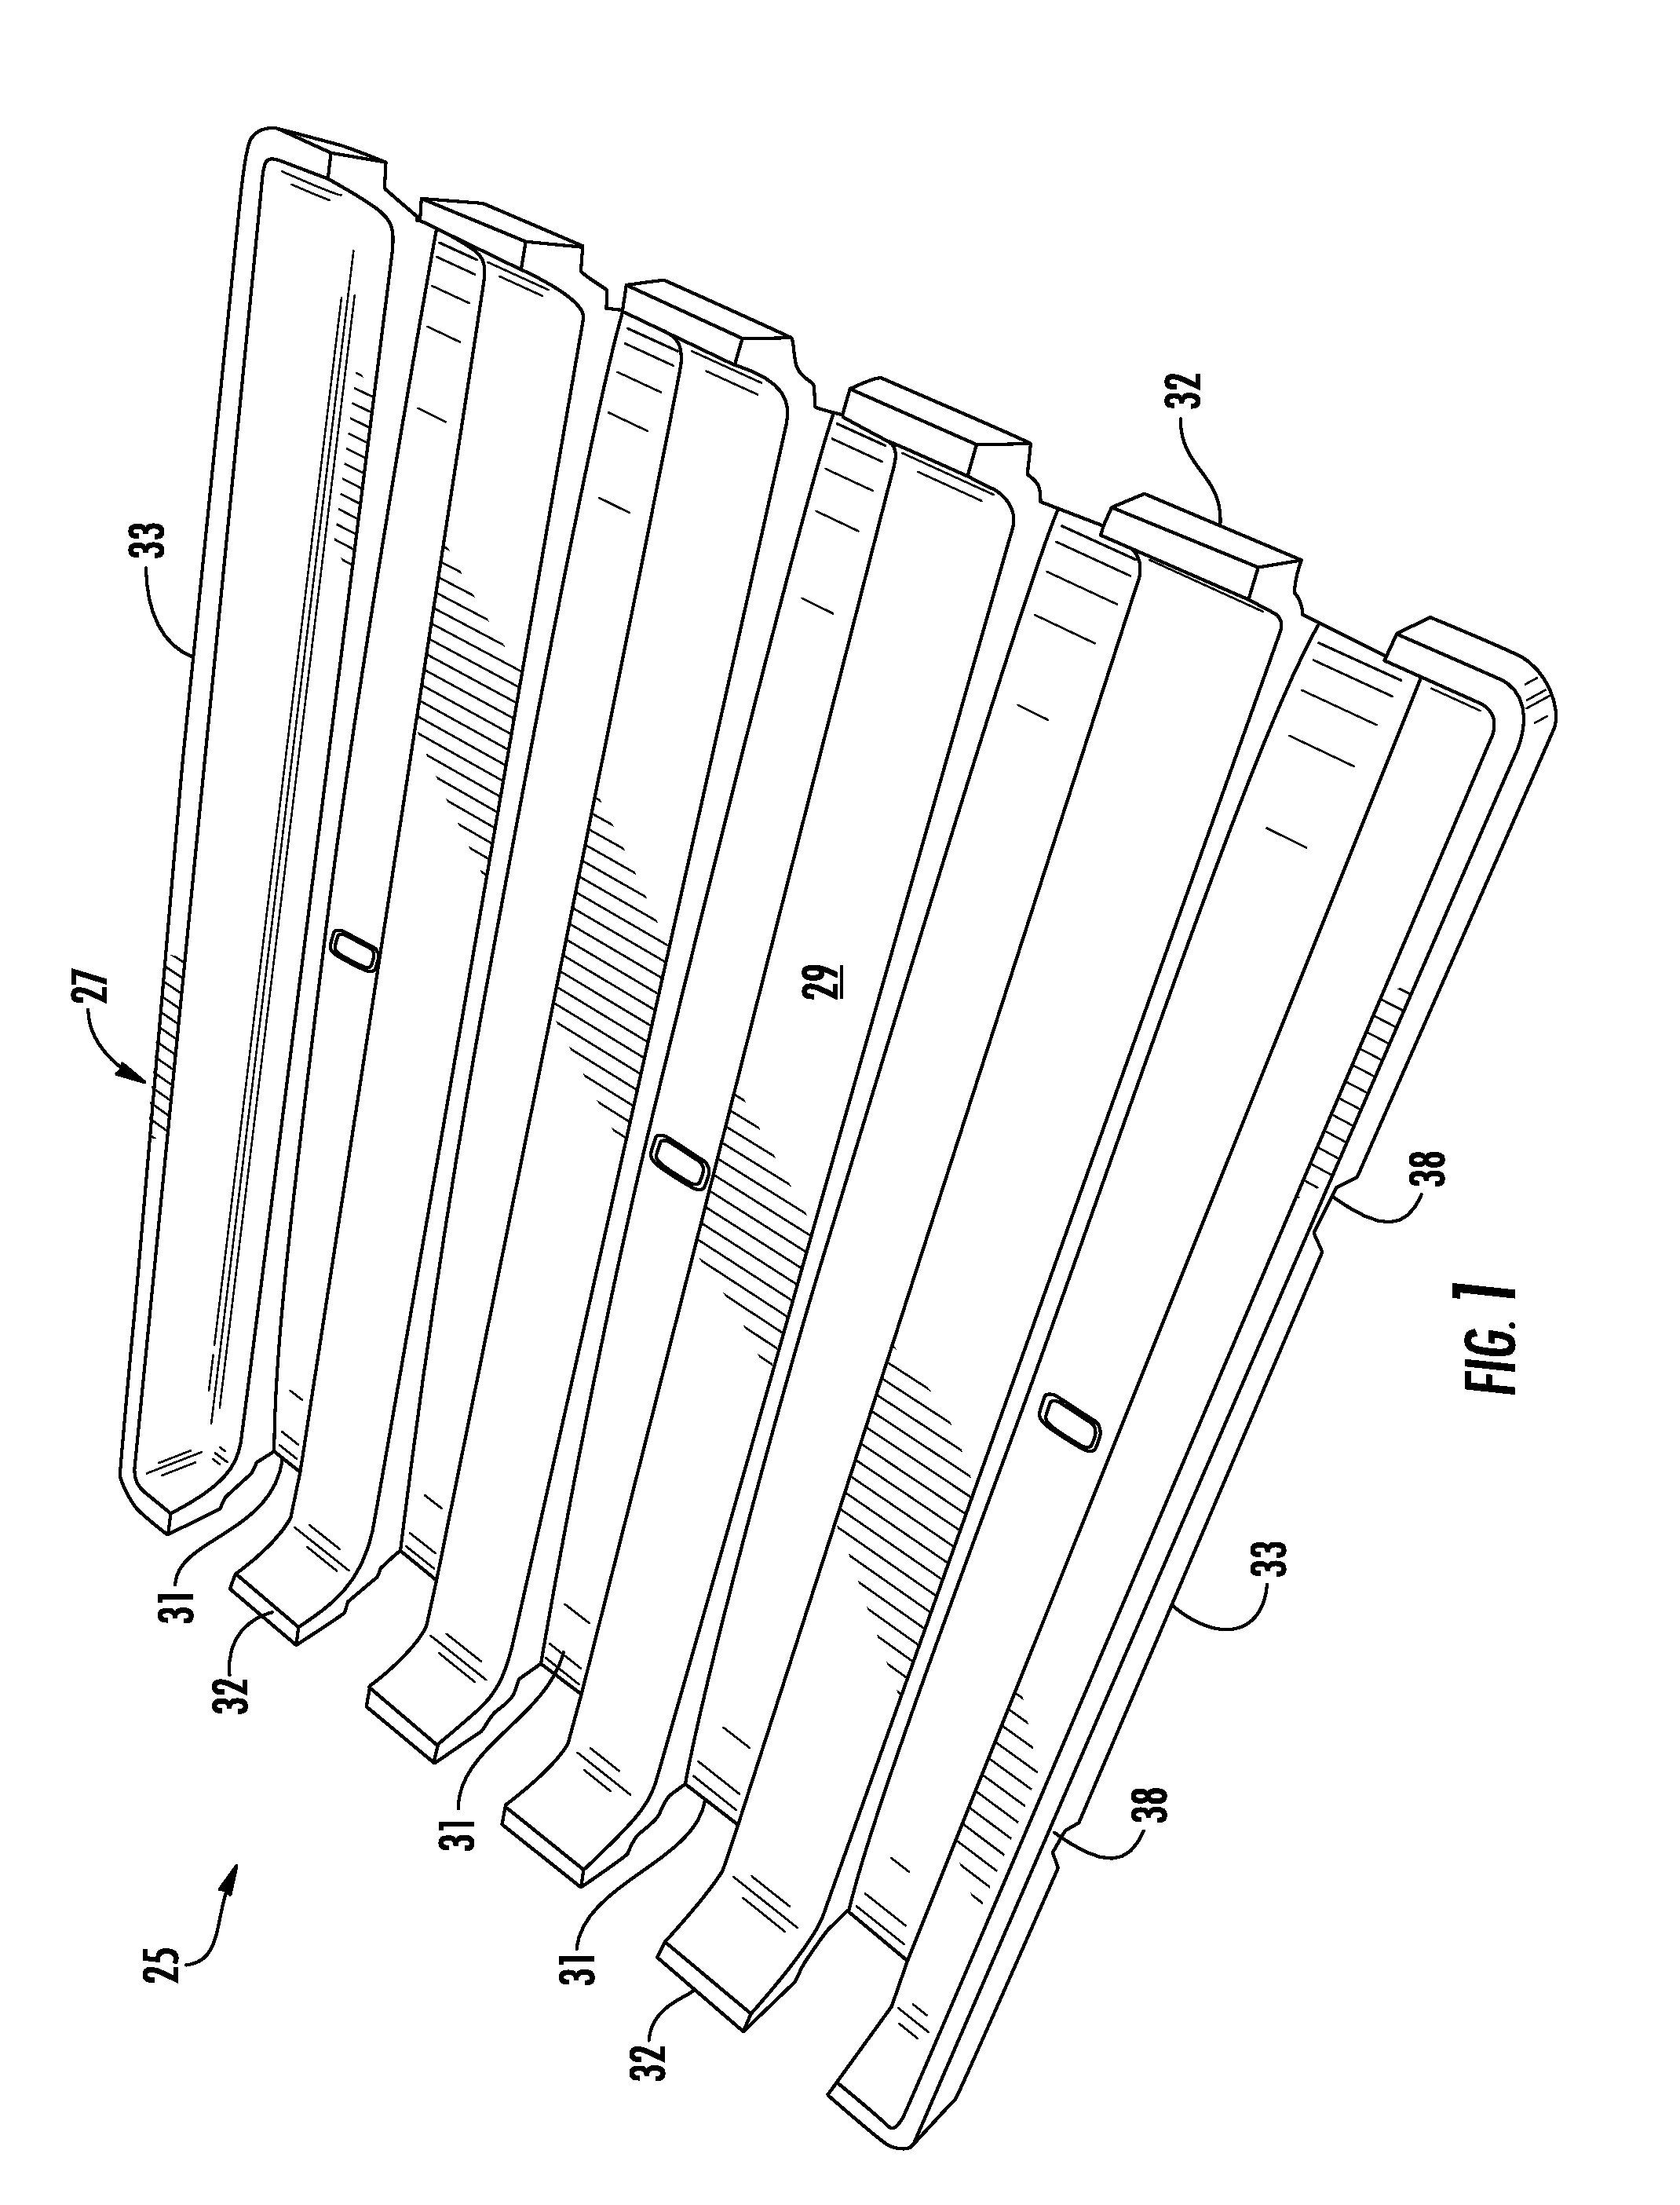 Article tray and handling of articles with the tray